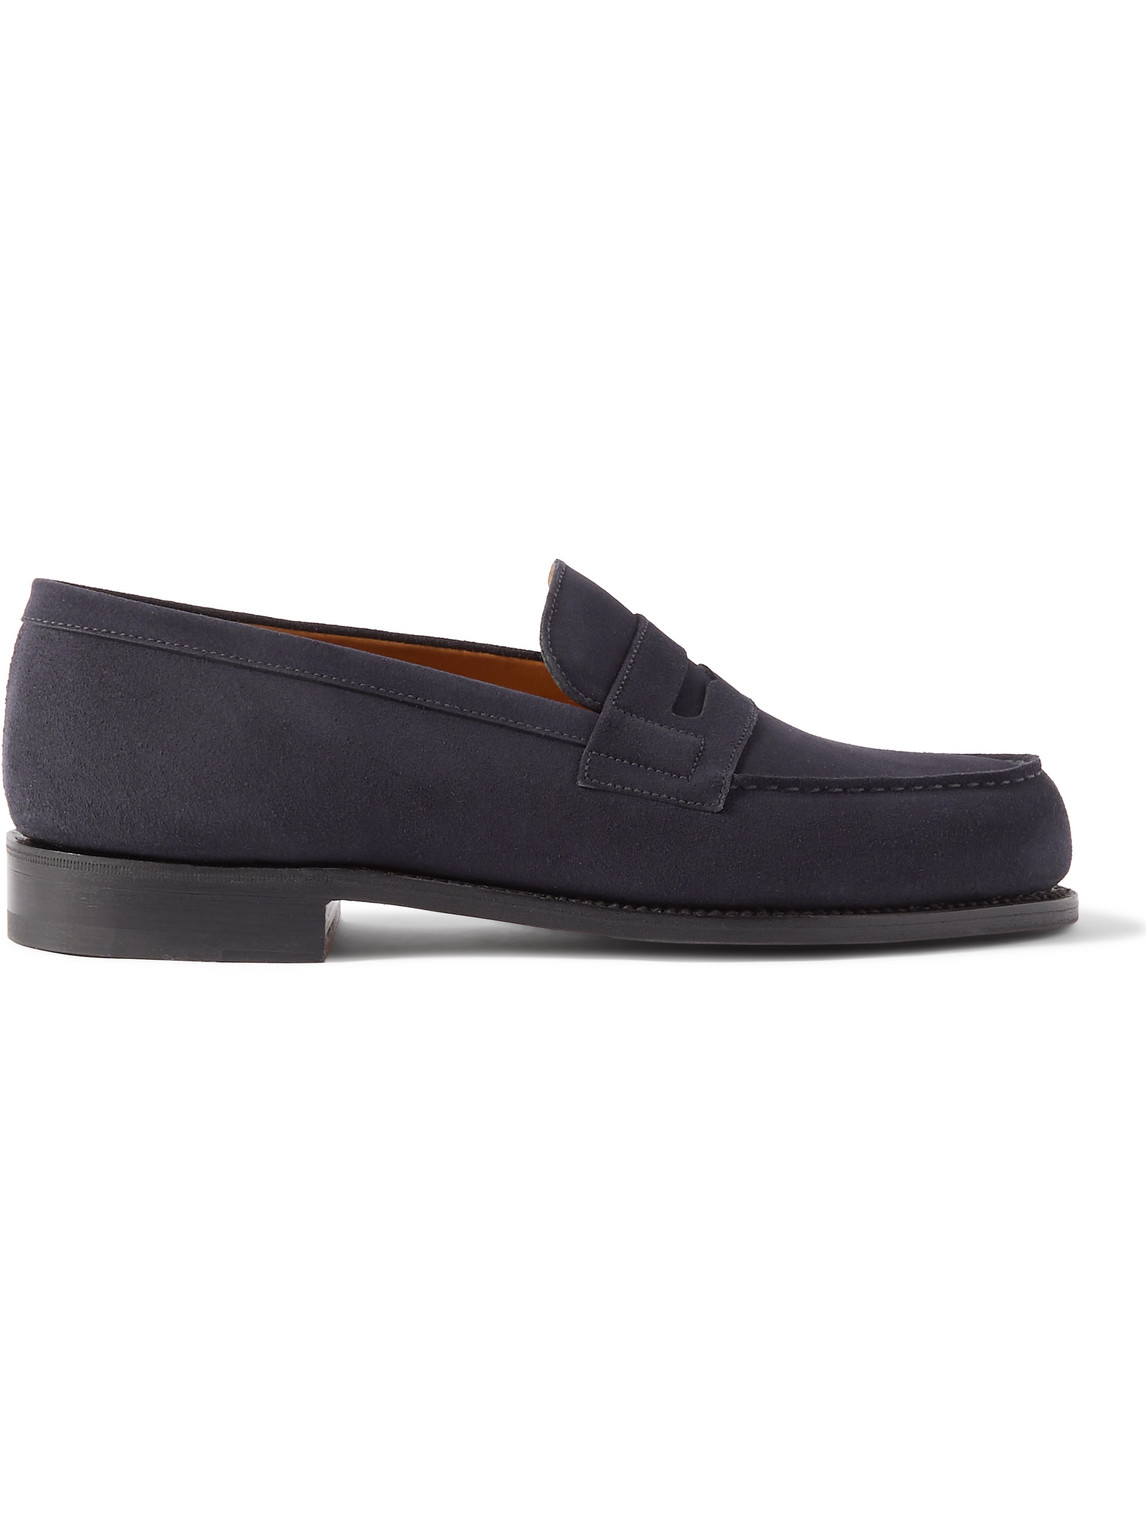 Jm Weston 180 Moccasin Suede Penny Loafers In Blue